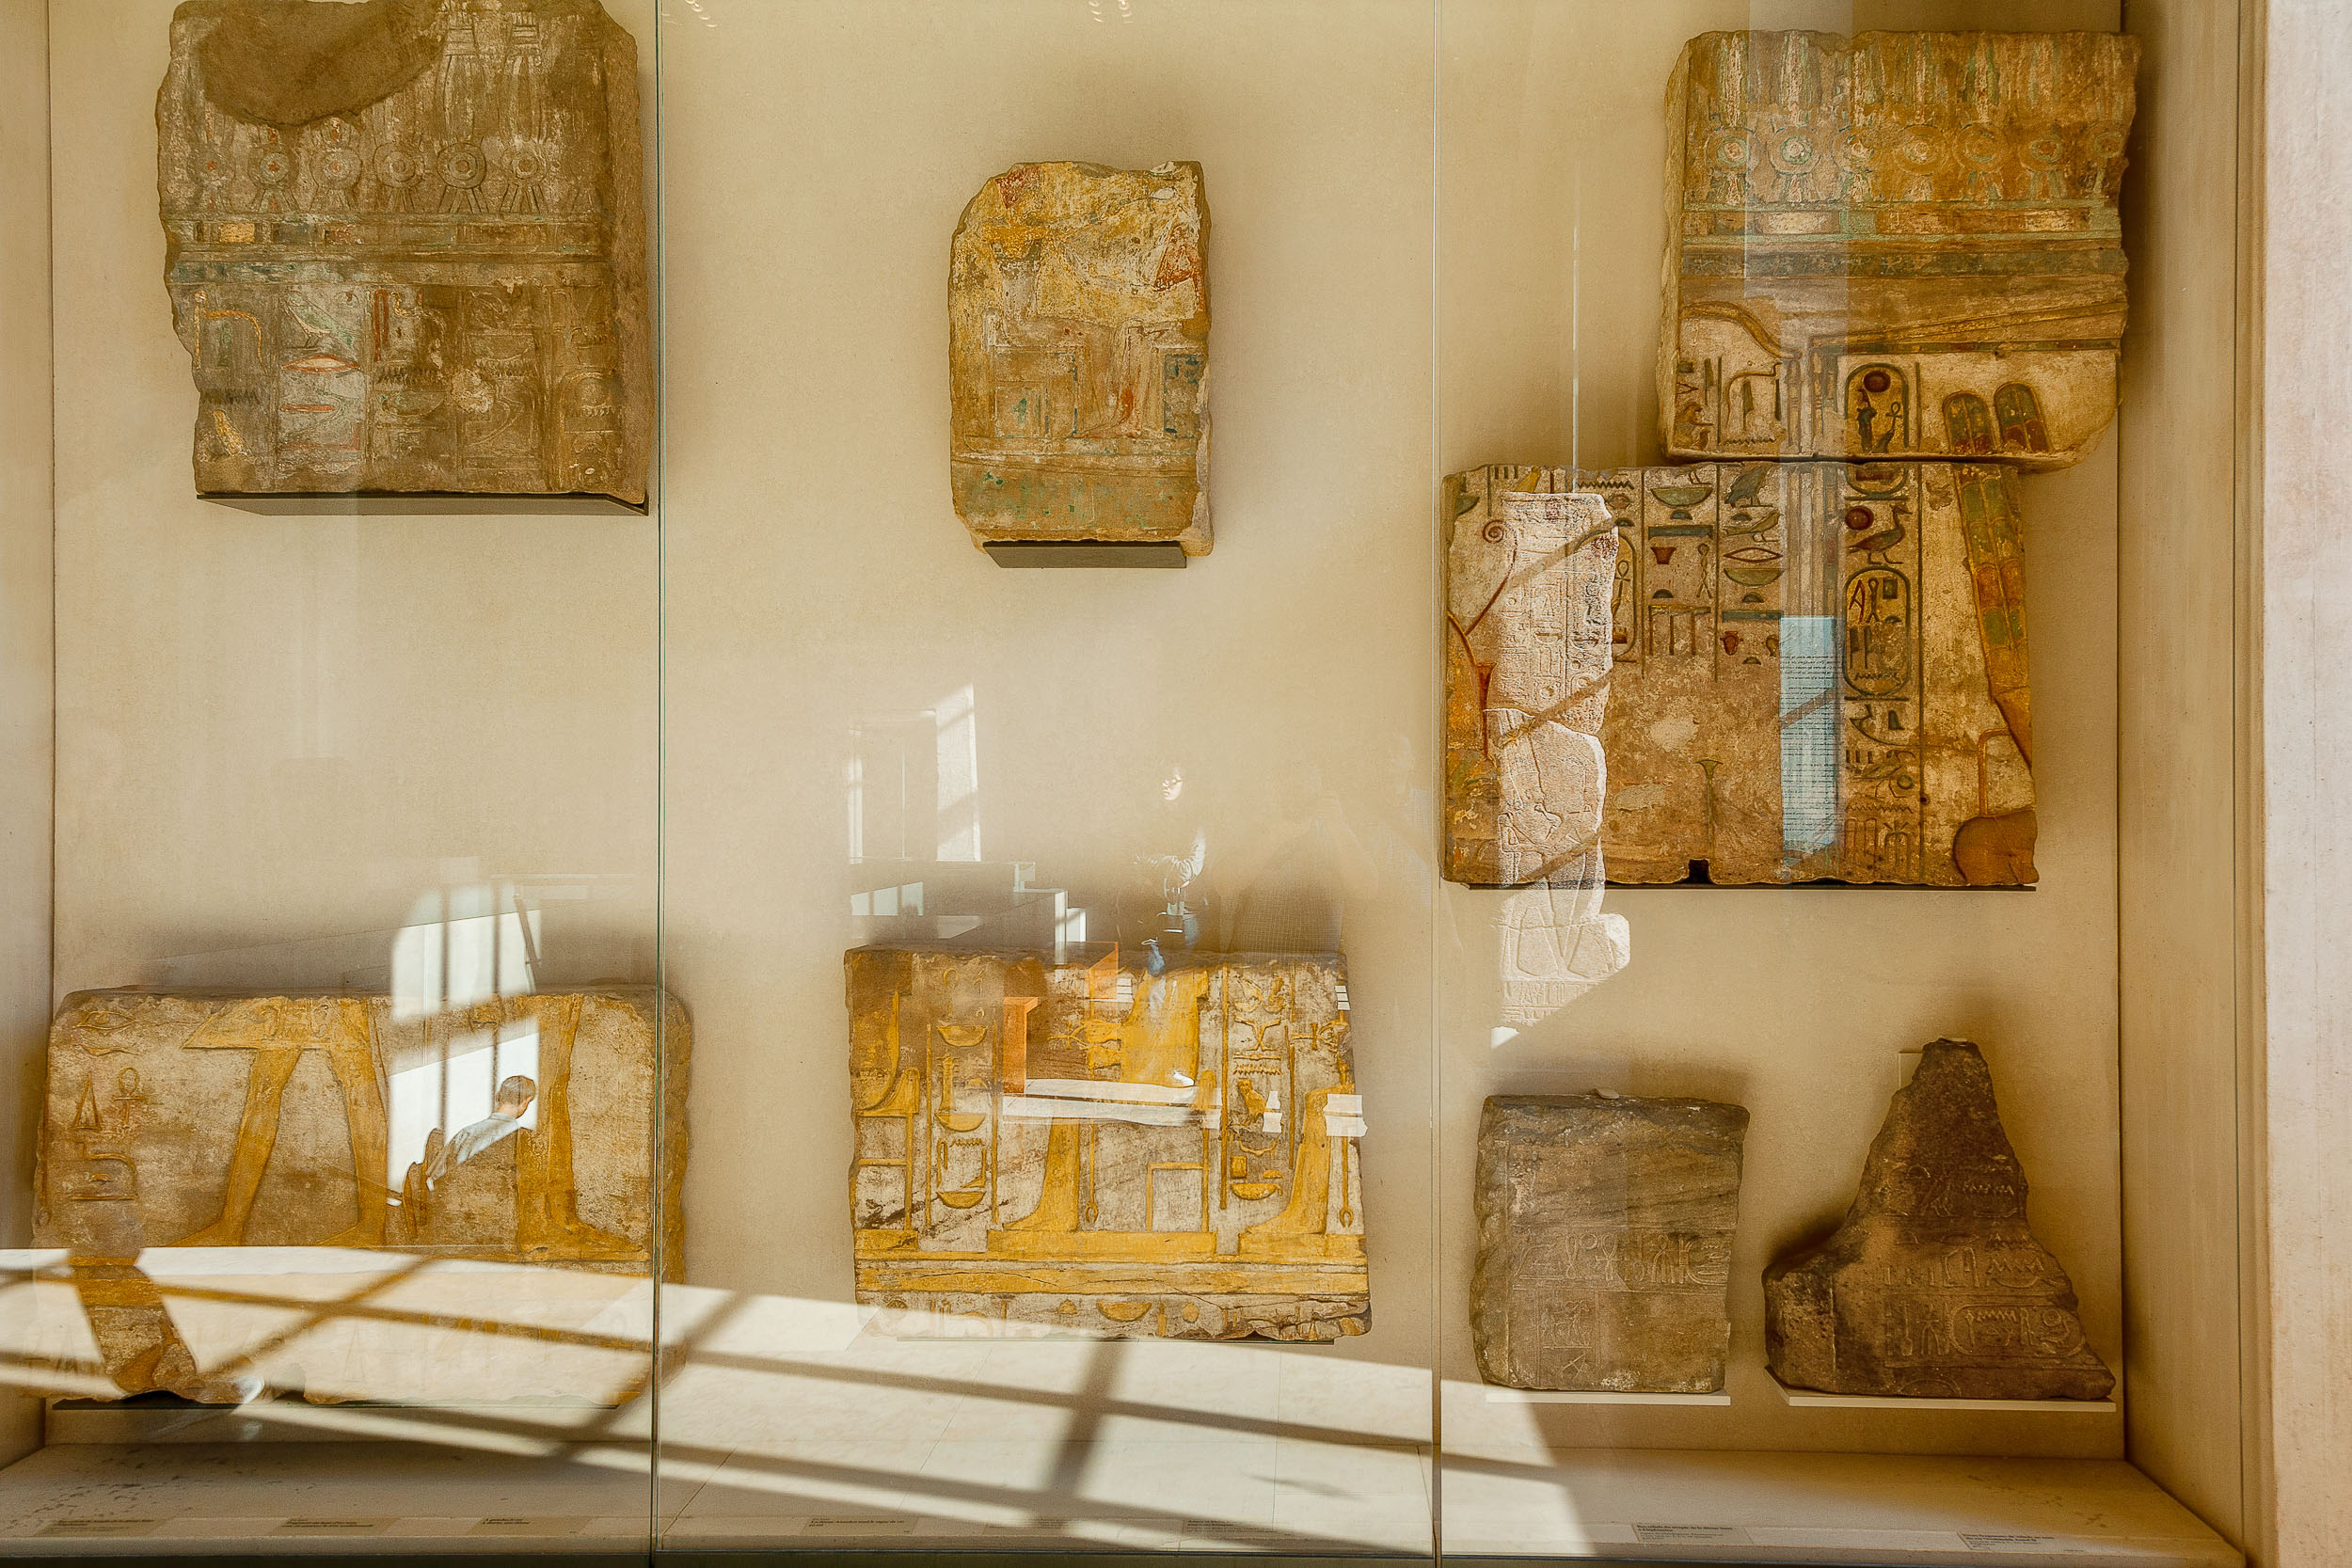 A display case showcasing stone tablets at the Louvre in Paris, France .